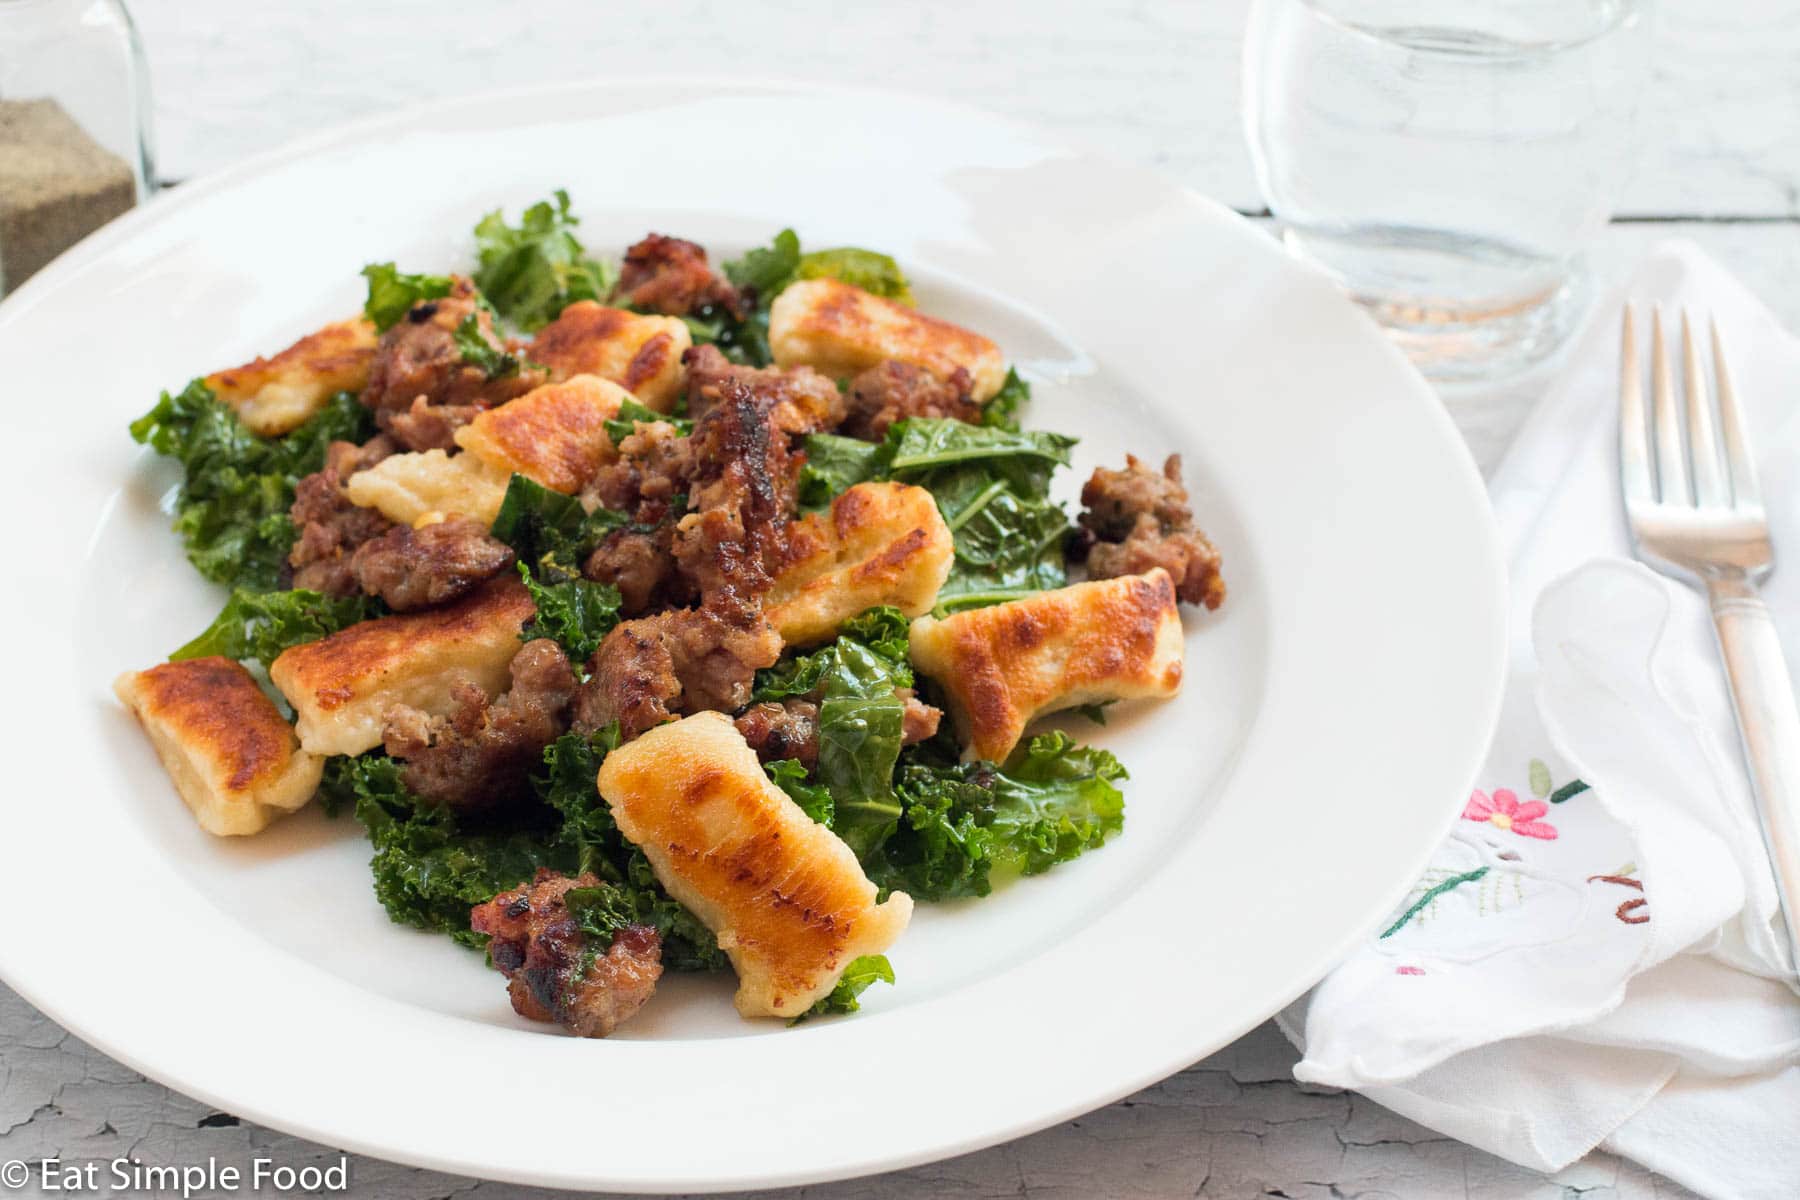 ¾ of a plate filled with browned gnocchi, sautéed kale, and ground sausage. On a white plate with a white napkin with small colorful flowers.